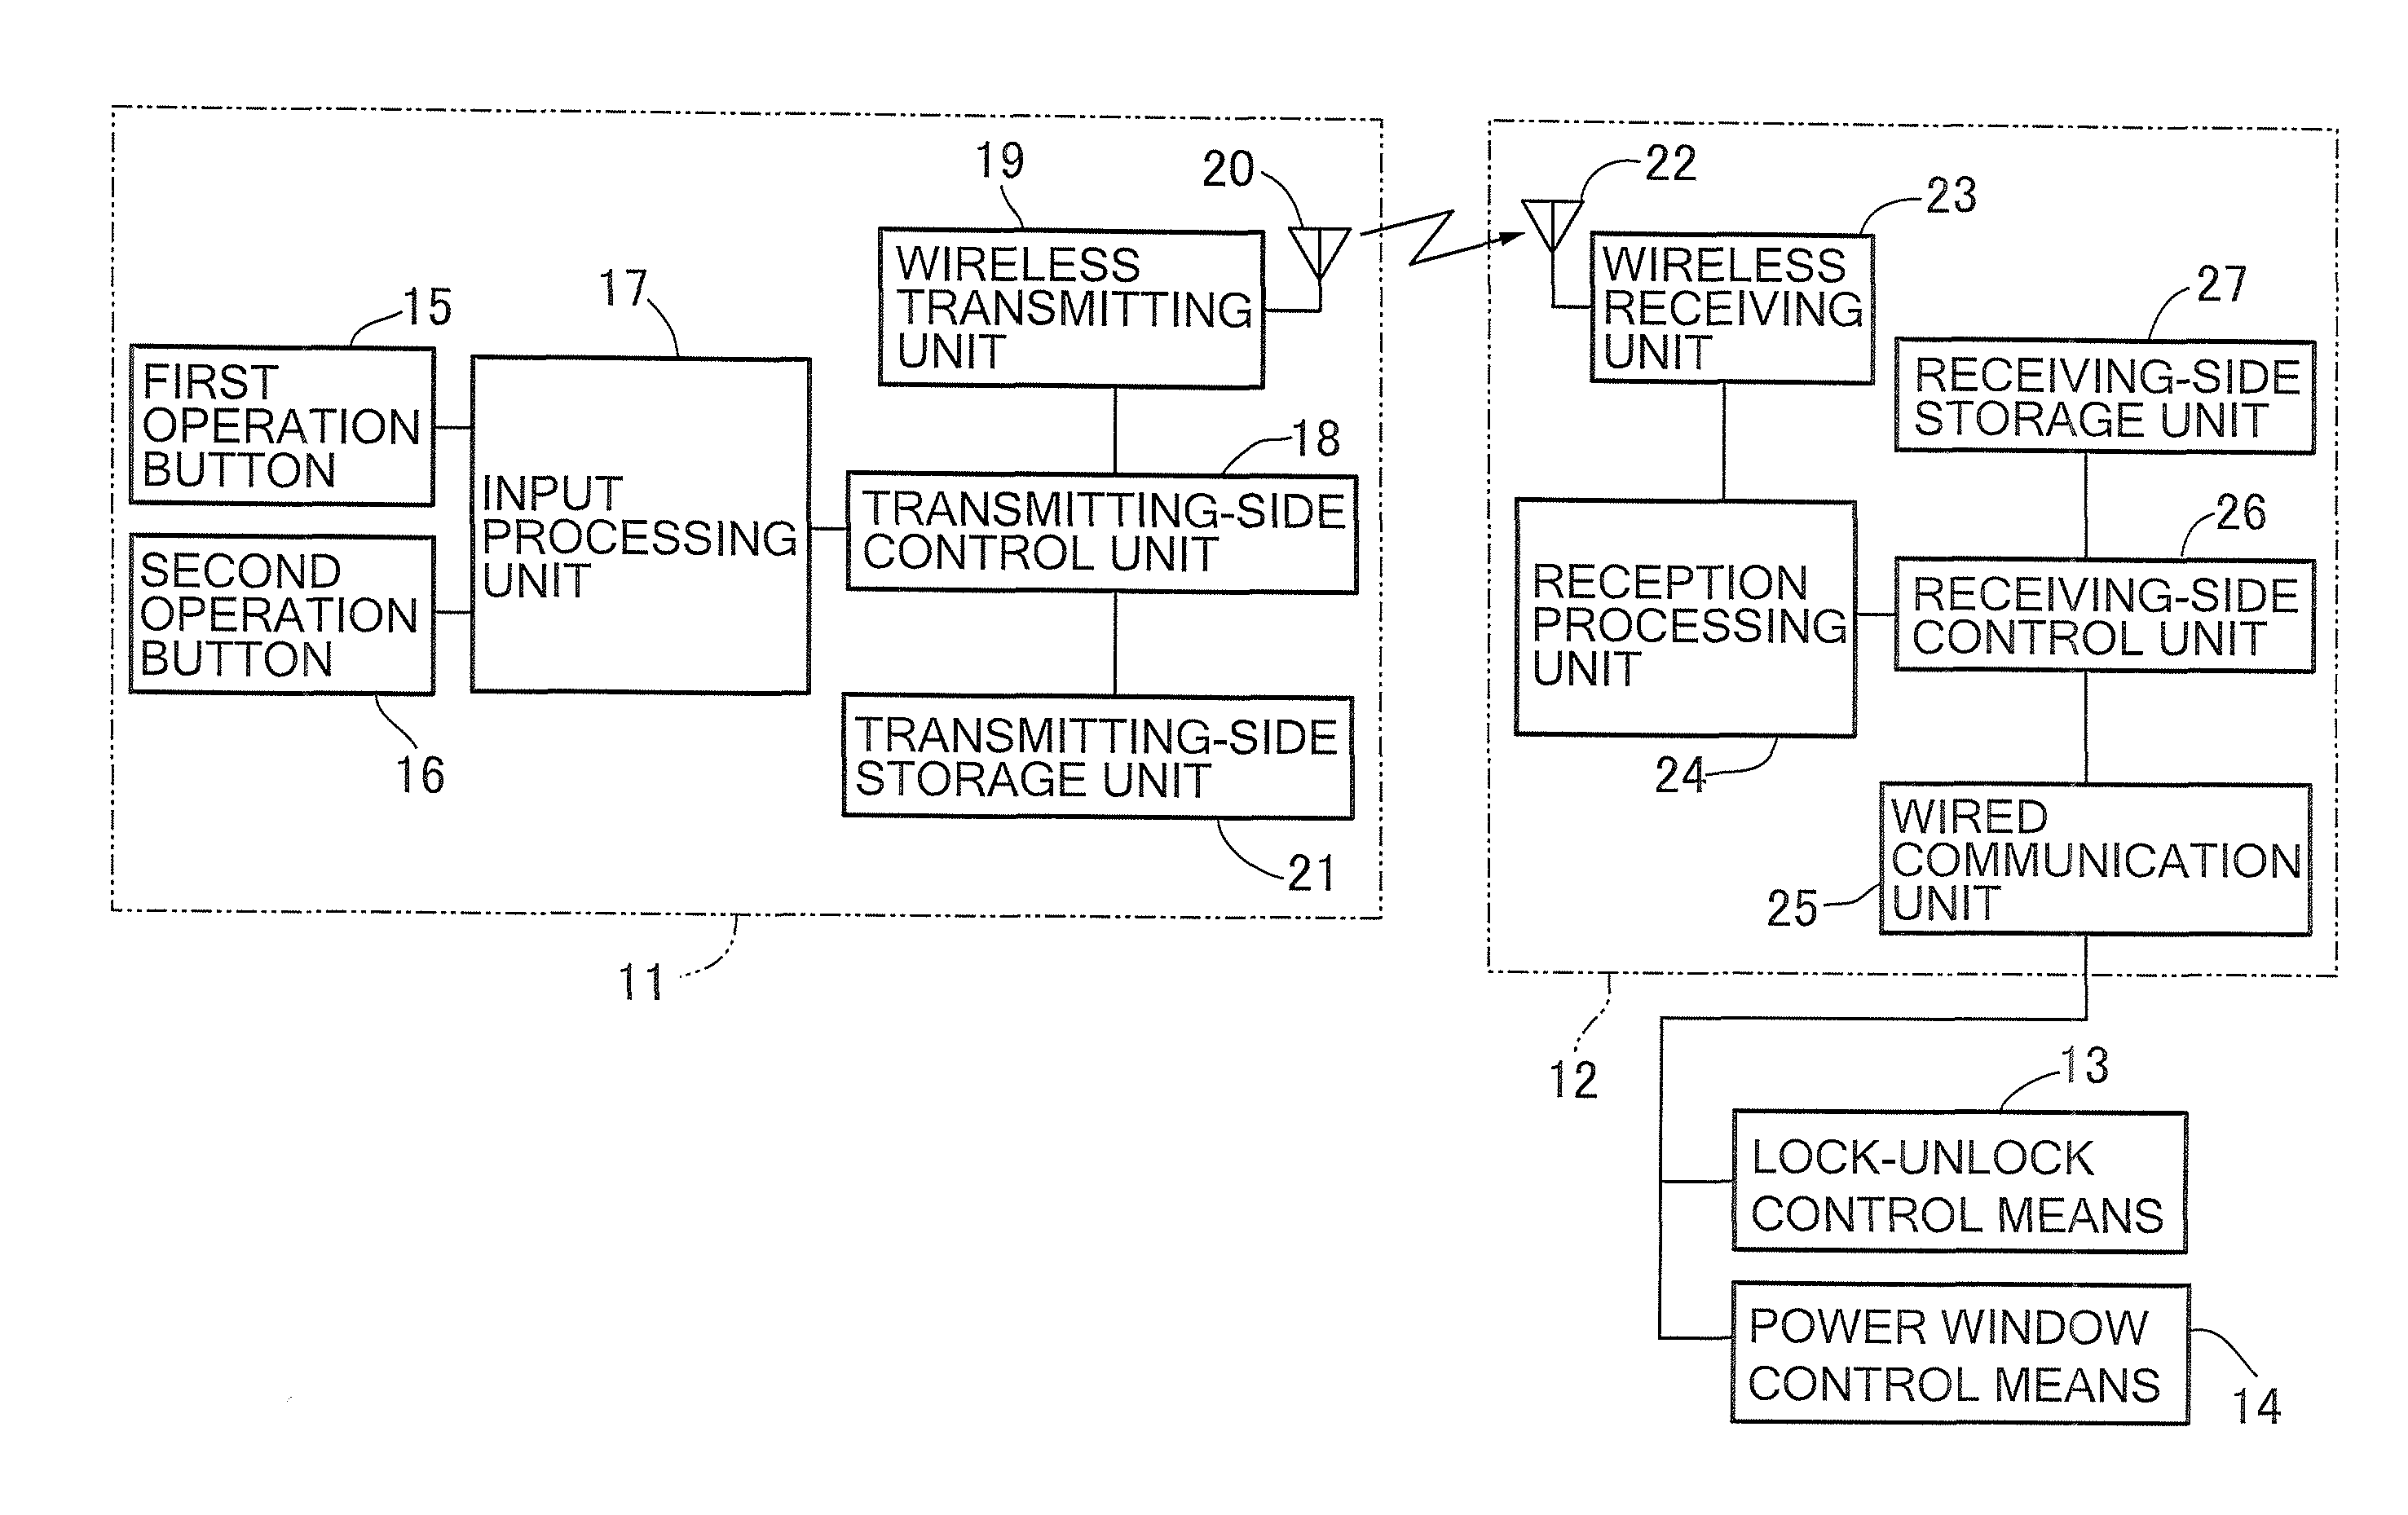 Remote control device for an activation device mounted in a vehicle